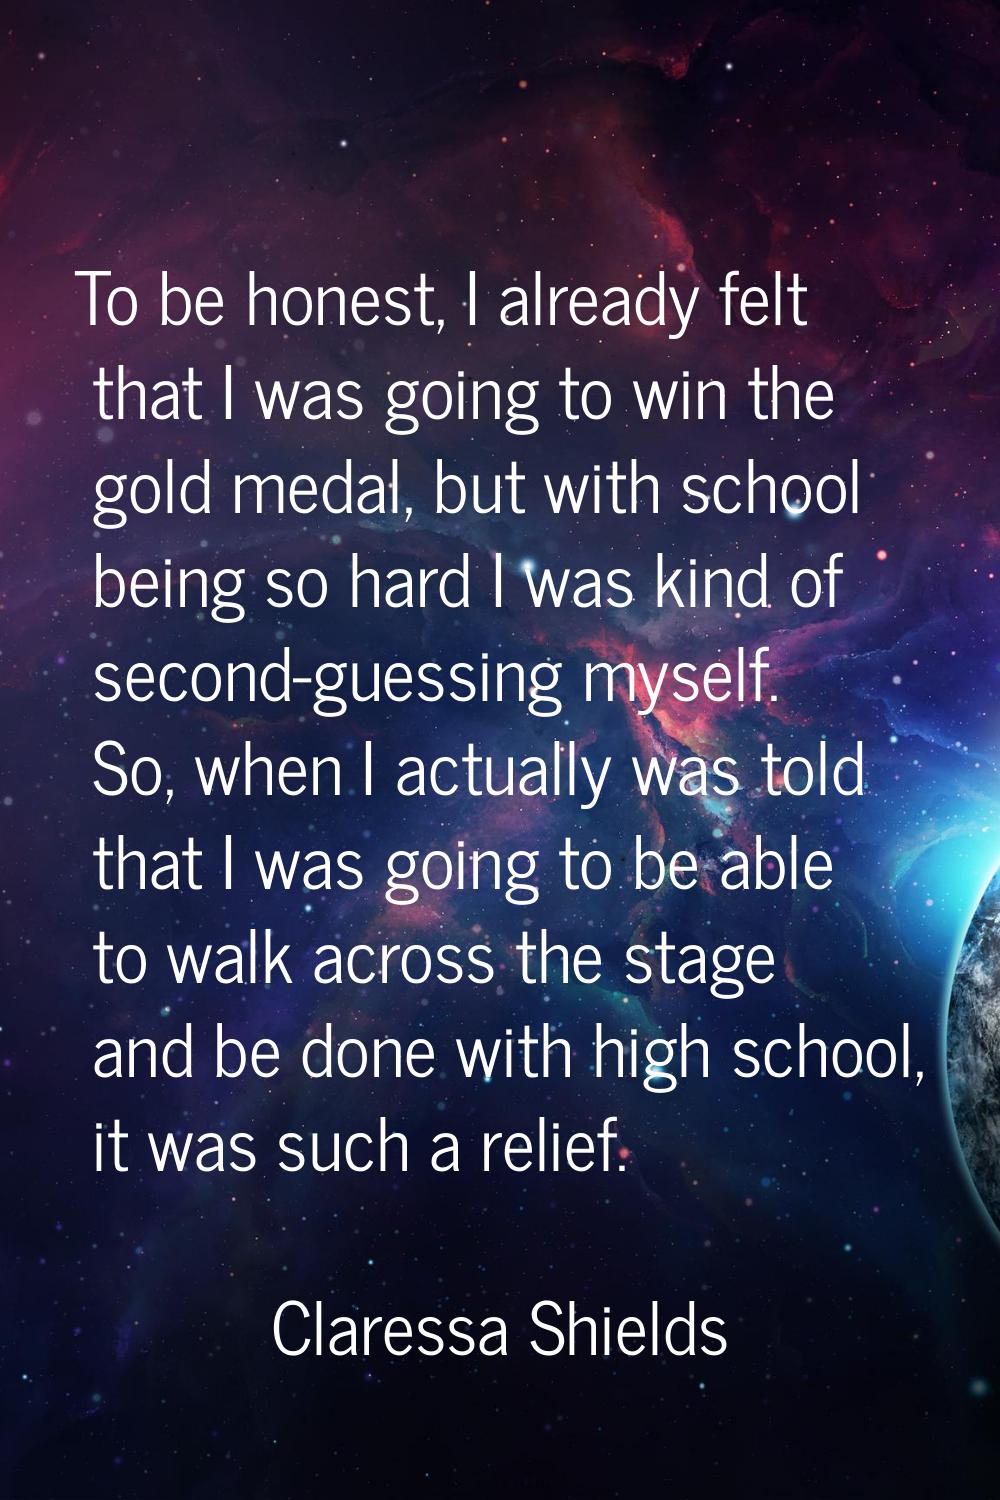 To be honest, I already felt that I was going to win the gold medal, but with school being so hard 